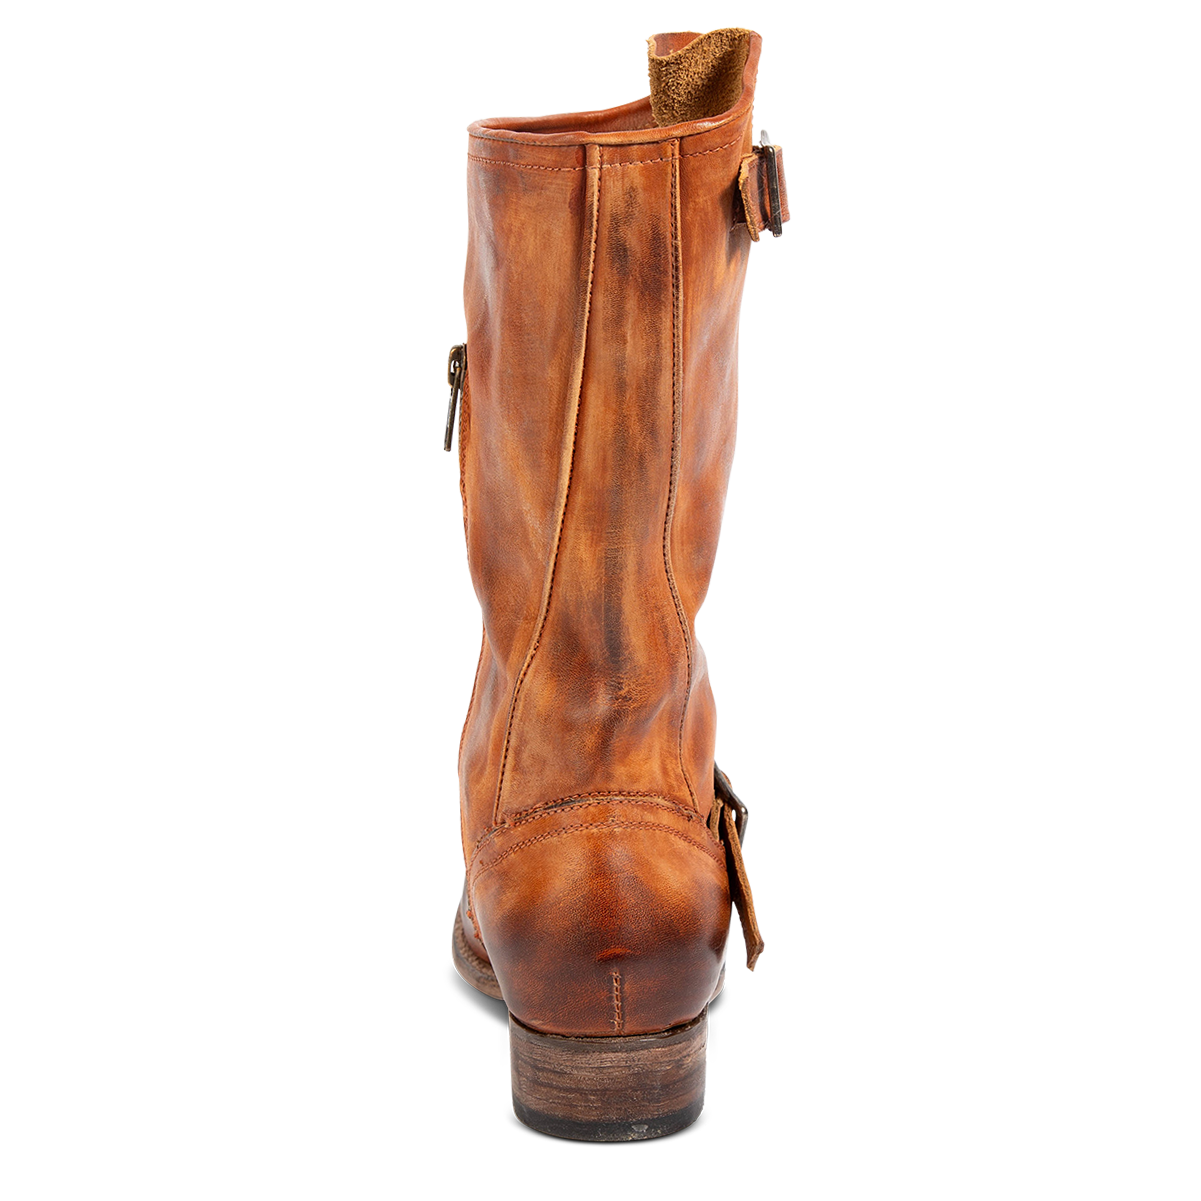 Back view showing an asymmetrical shaft height and low block heel on FREEBIRD women's Rip whiskey leather boot